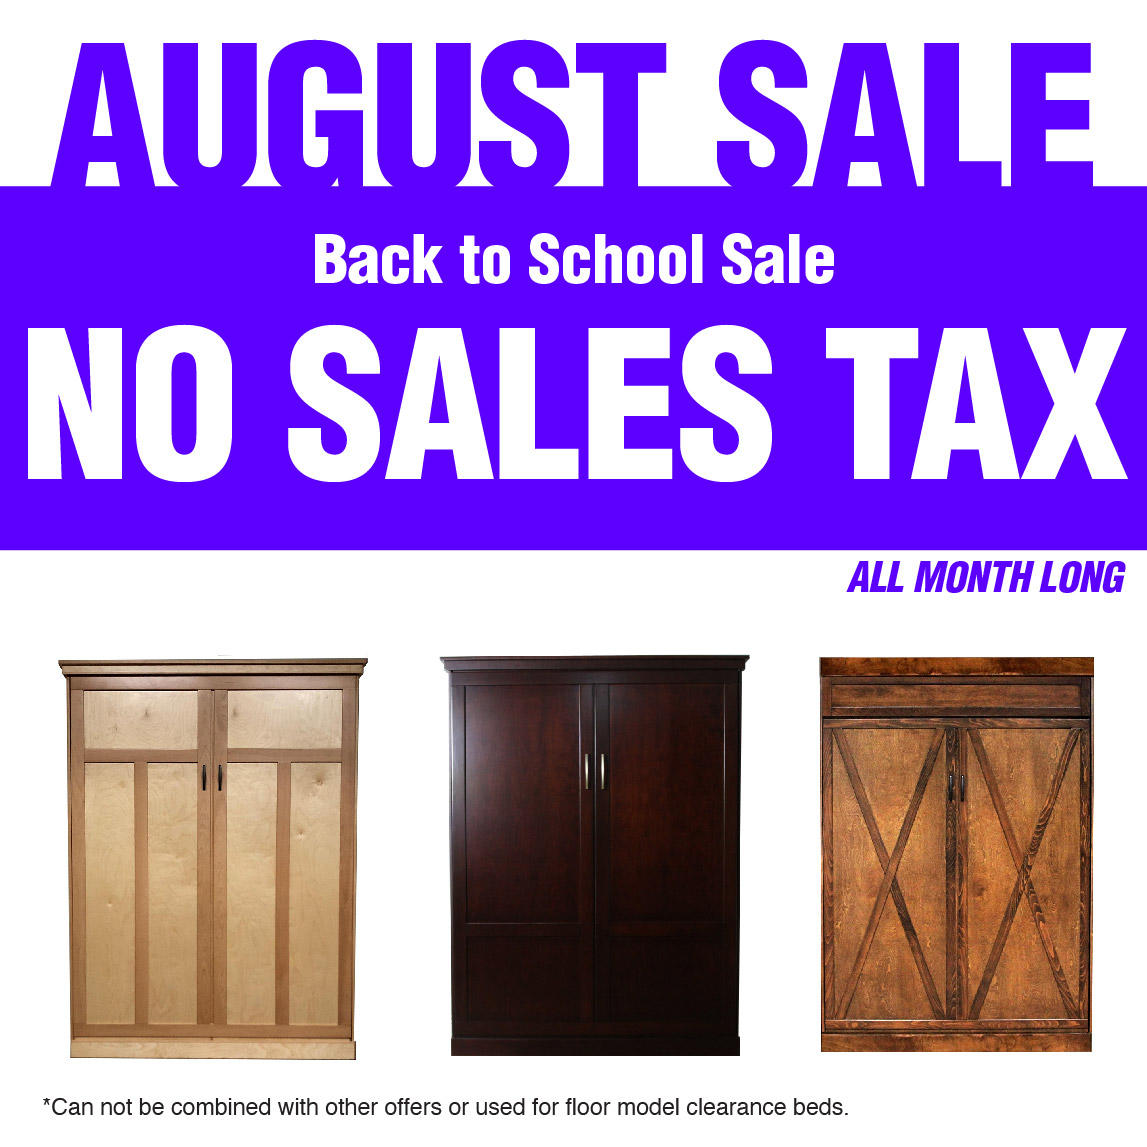 Save on a New Wall Bed or Murphy bed with our "No Sales Tax" back to school Special!